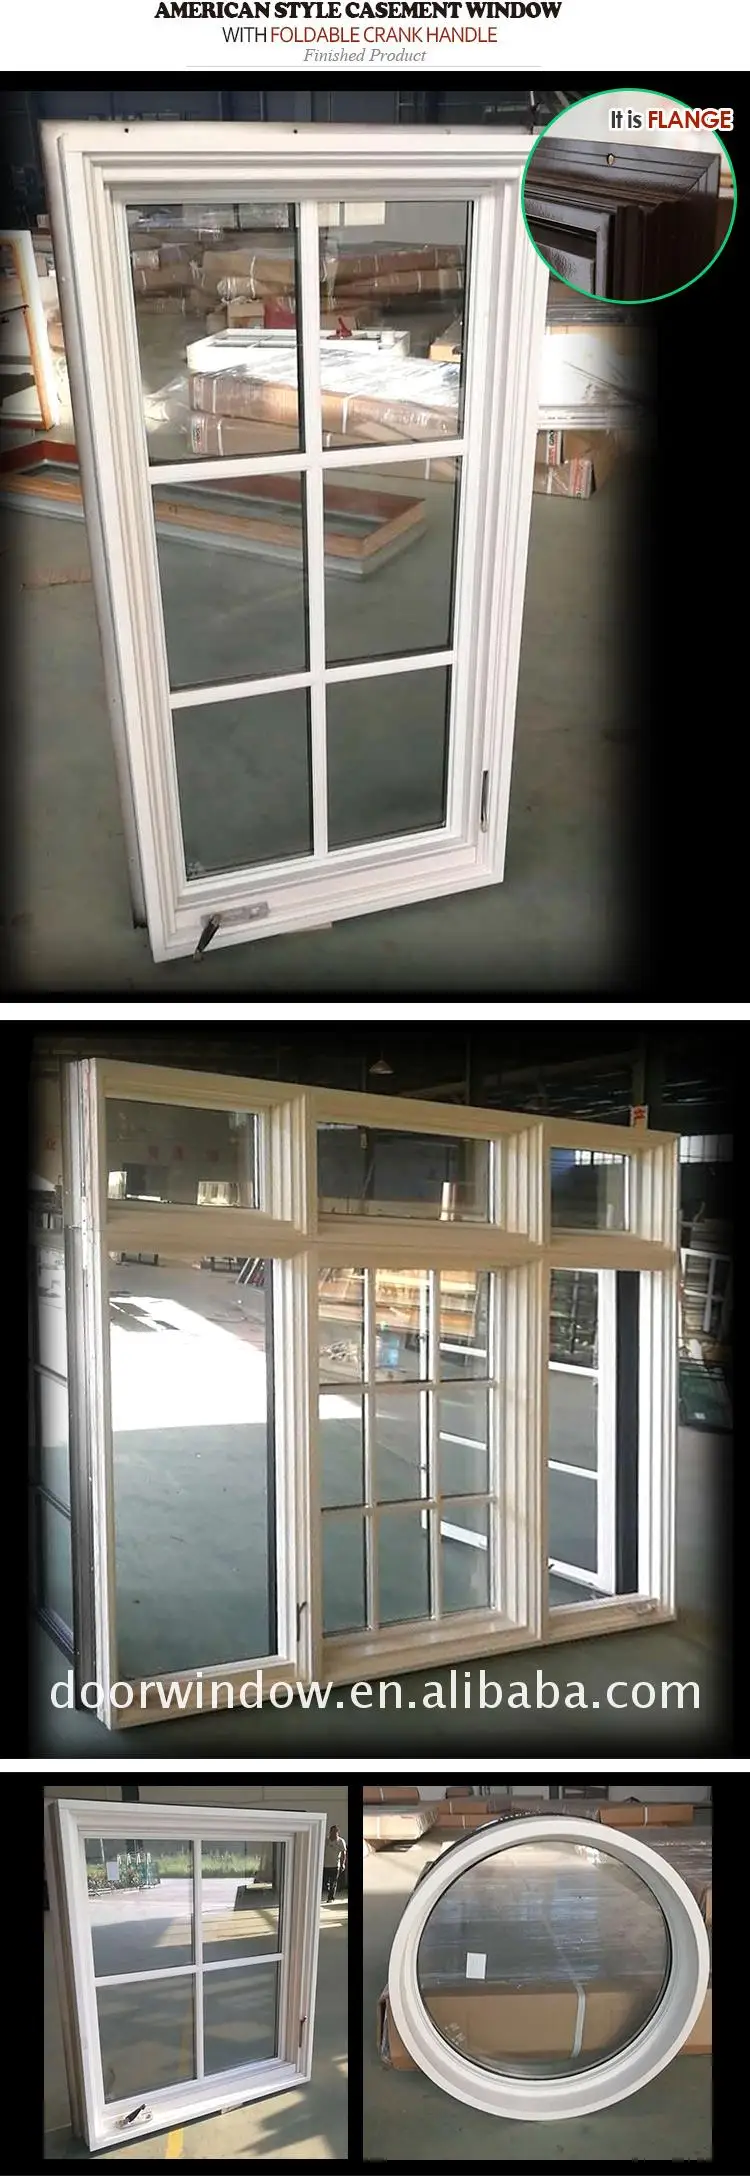 Manufactory Wholesale wooden windows for sale window with screen frames designs